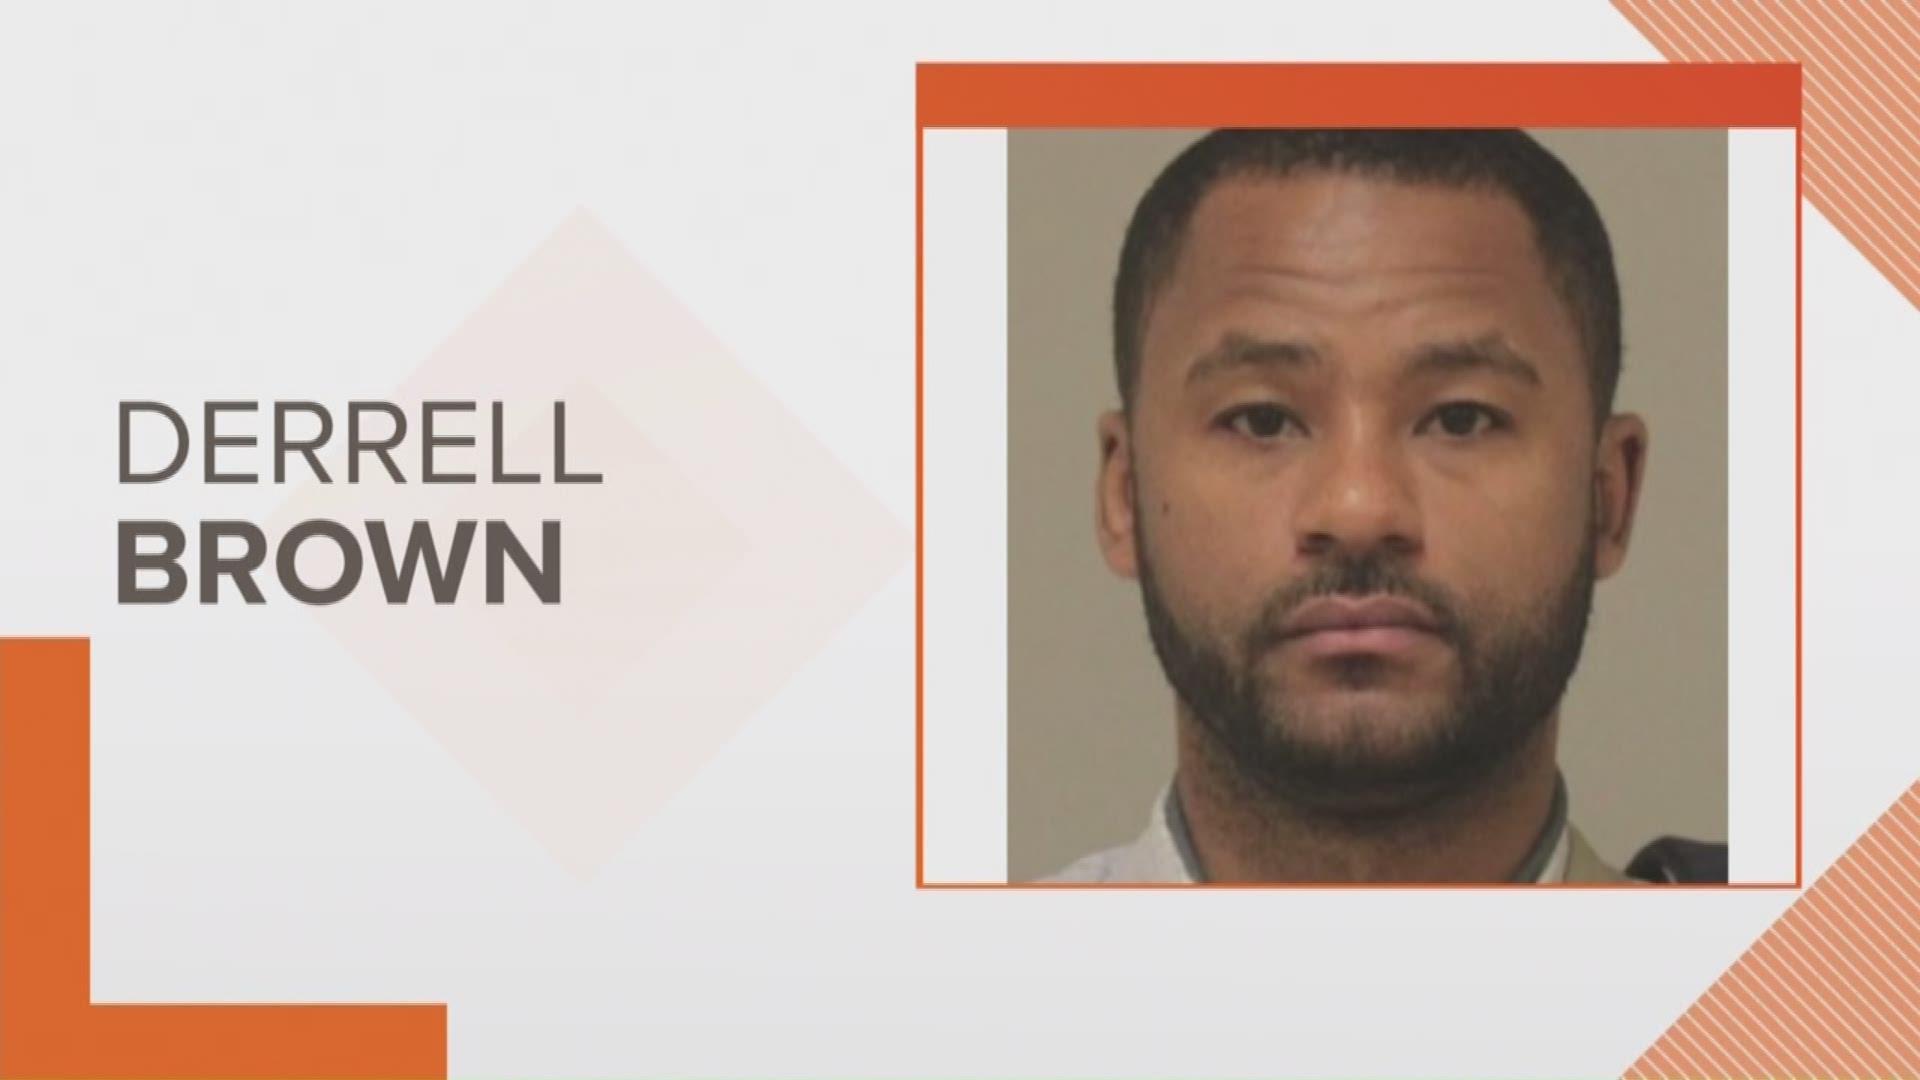 Silent Observer has increased their reward to $2,000 for tips leading to Brown's arrest.